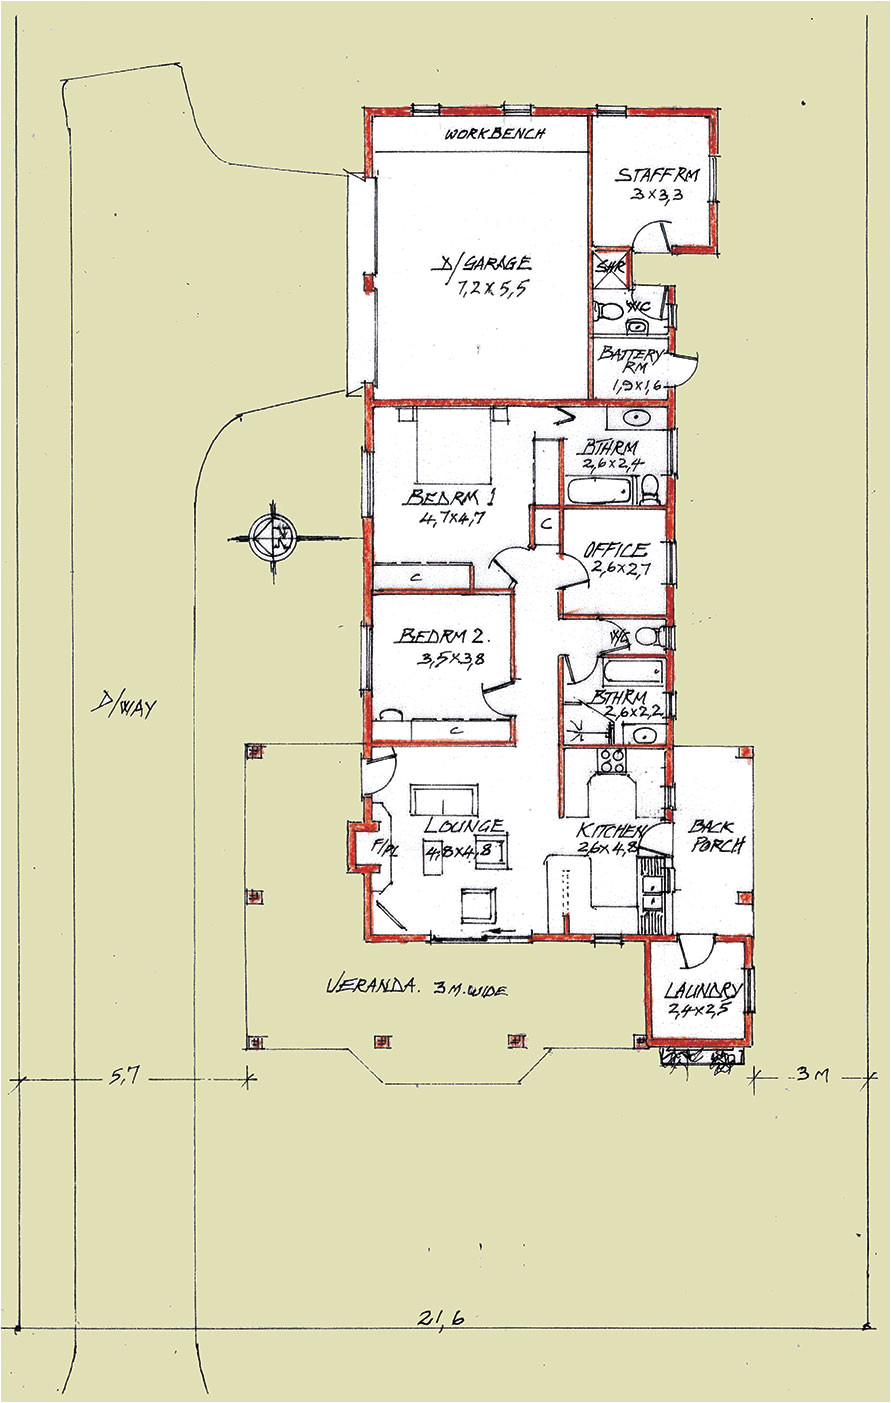 Simple Cost Effective House Plans Simple Cost Effective House Plans In Kenya Joy Studio